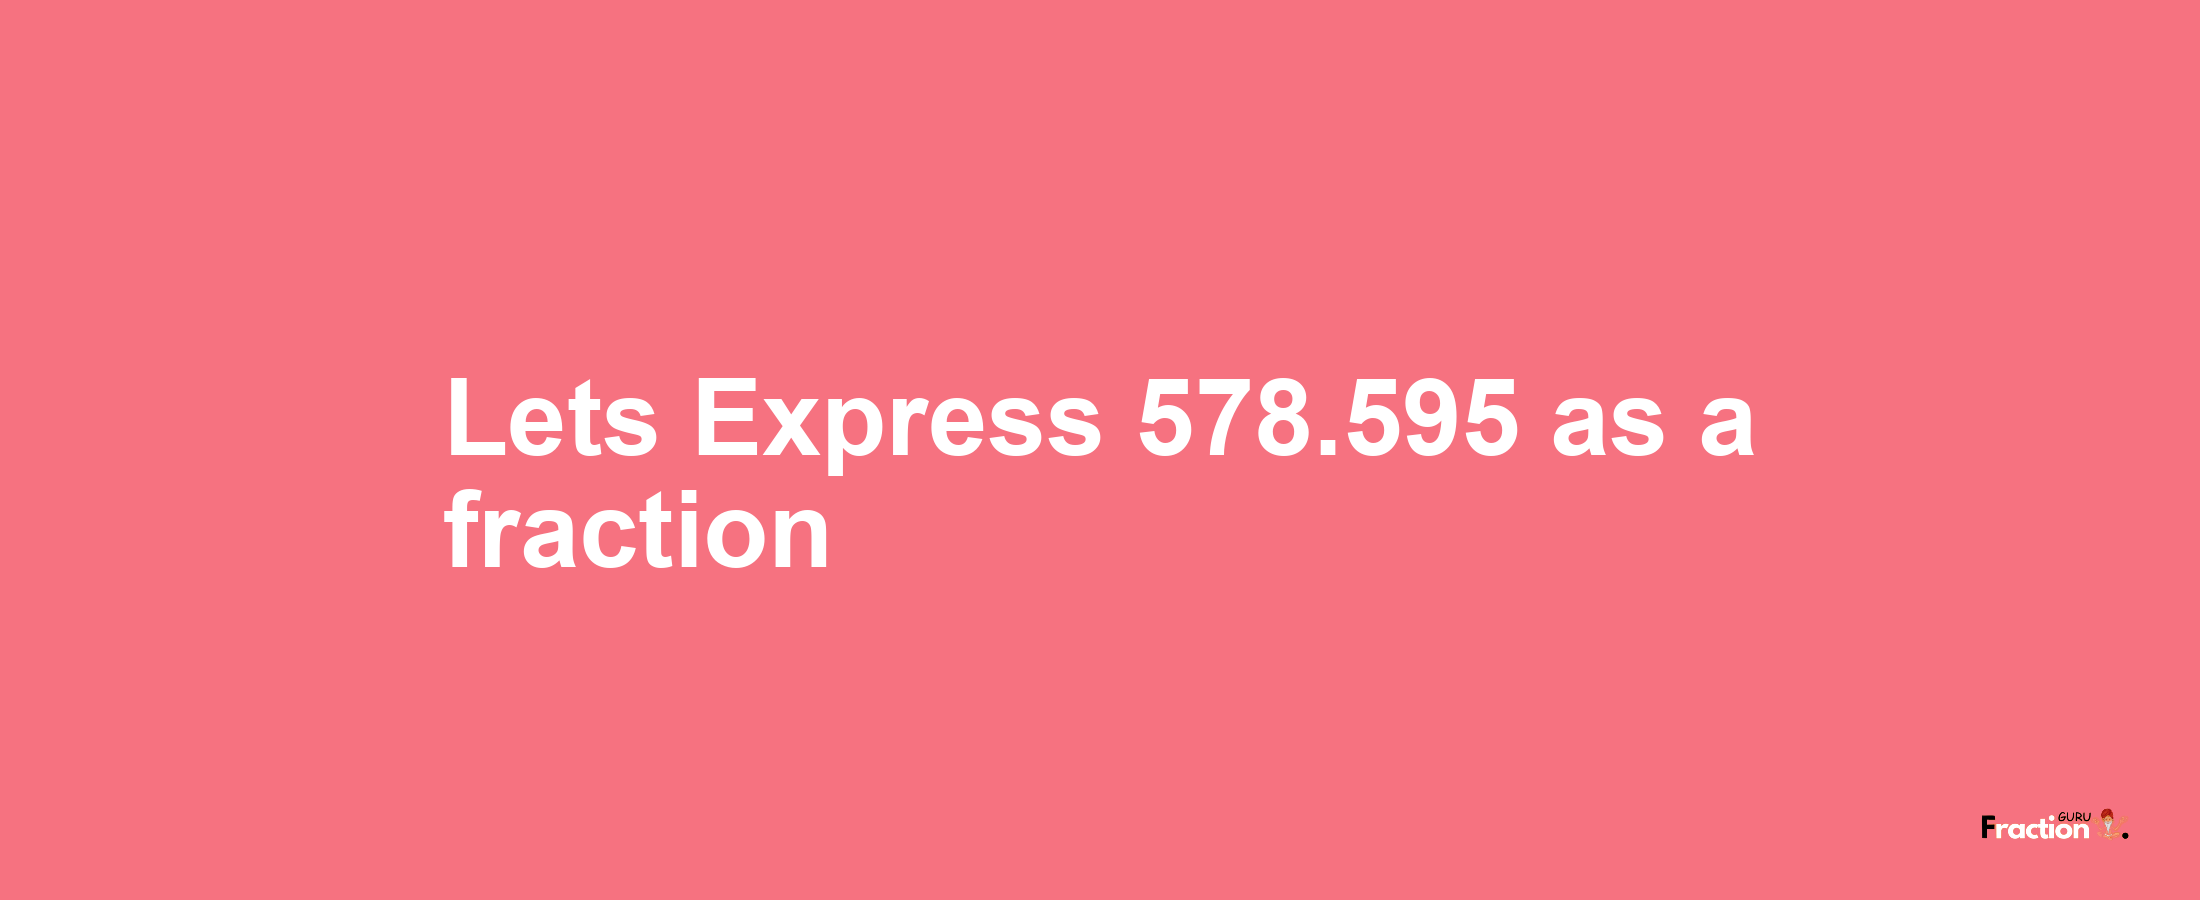 Lets Express 578.595 as afraction